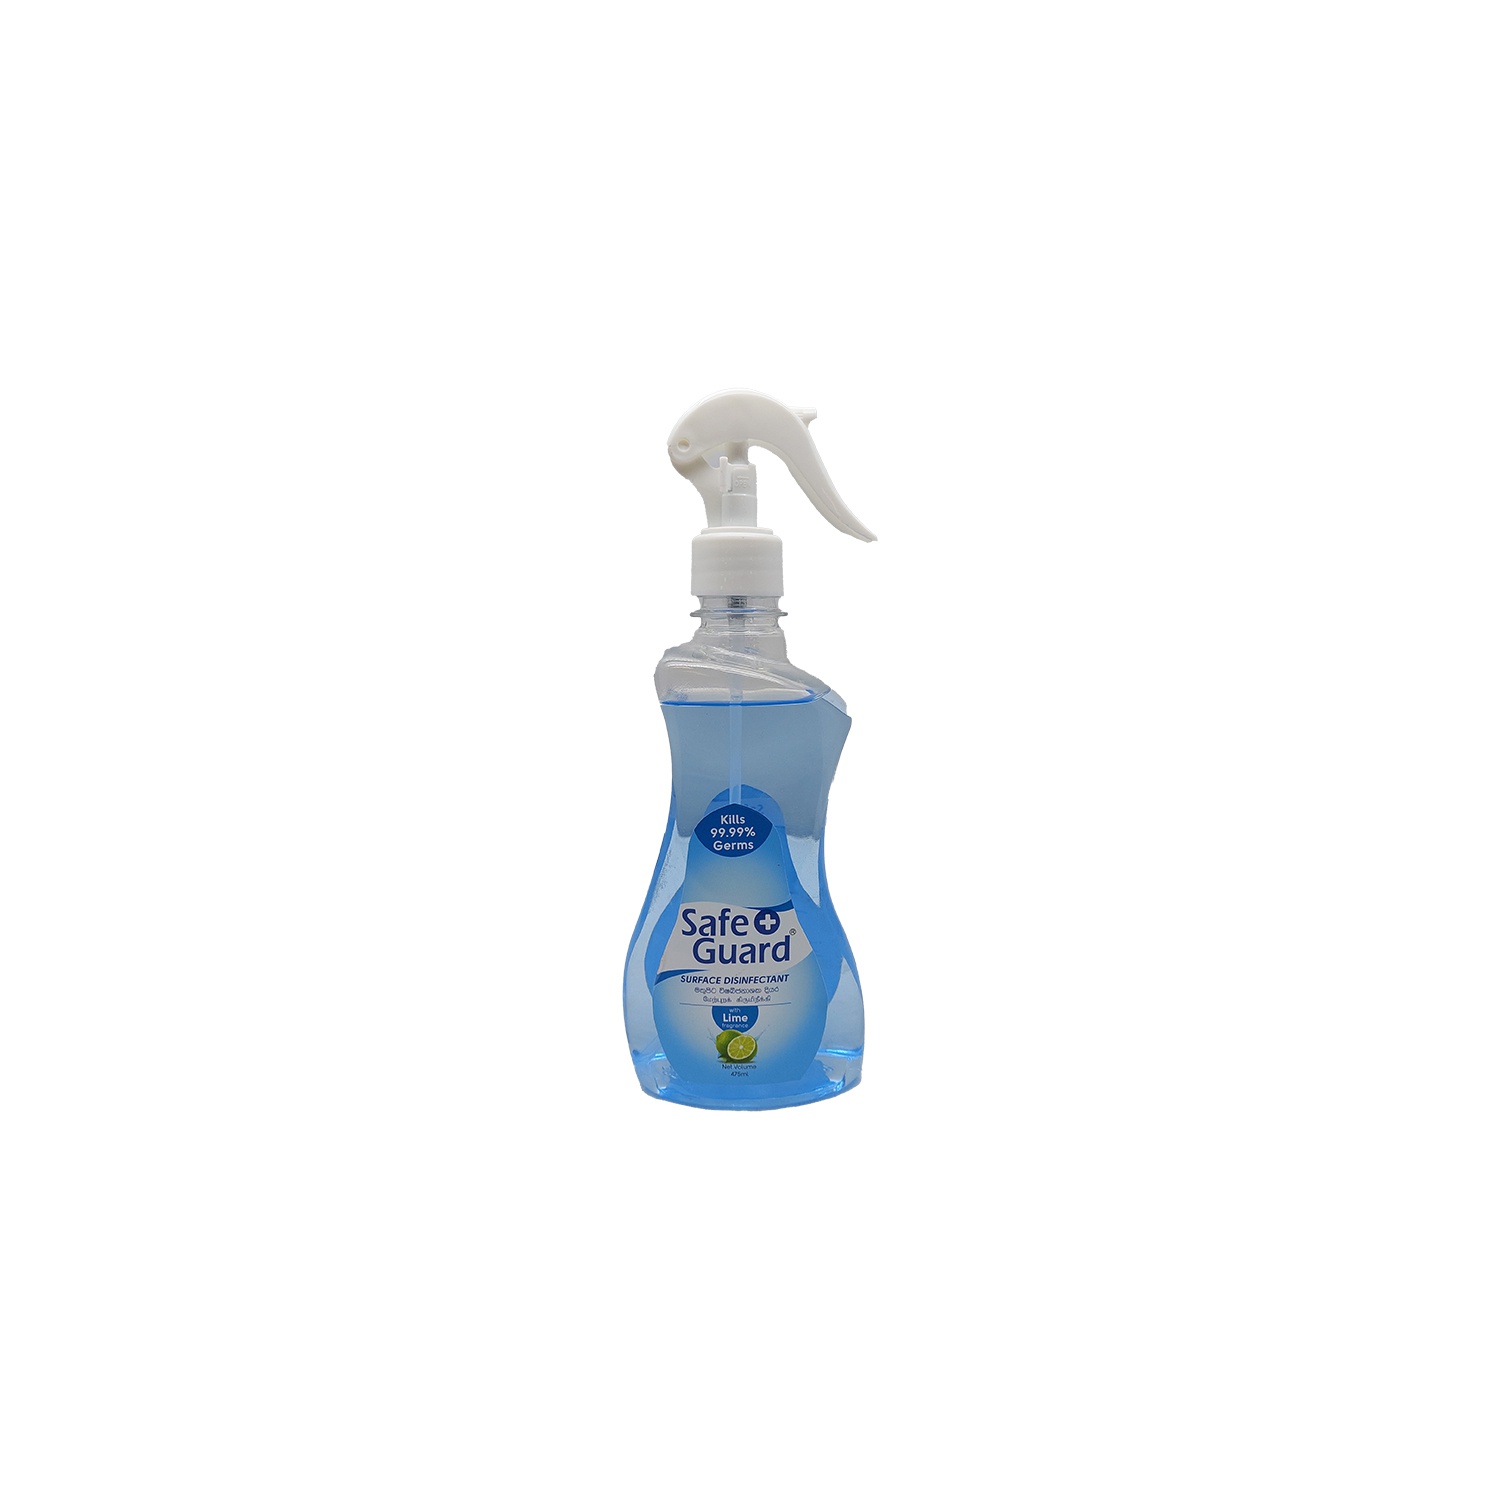 Safe Guard Multi Surface Disinfectant 475Ml - SAFE GUARD - Cleaning Consumables - in Sri Lanka